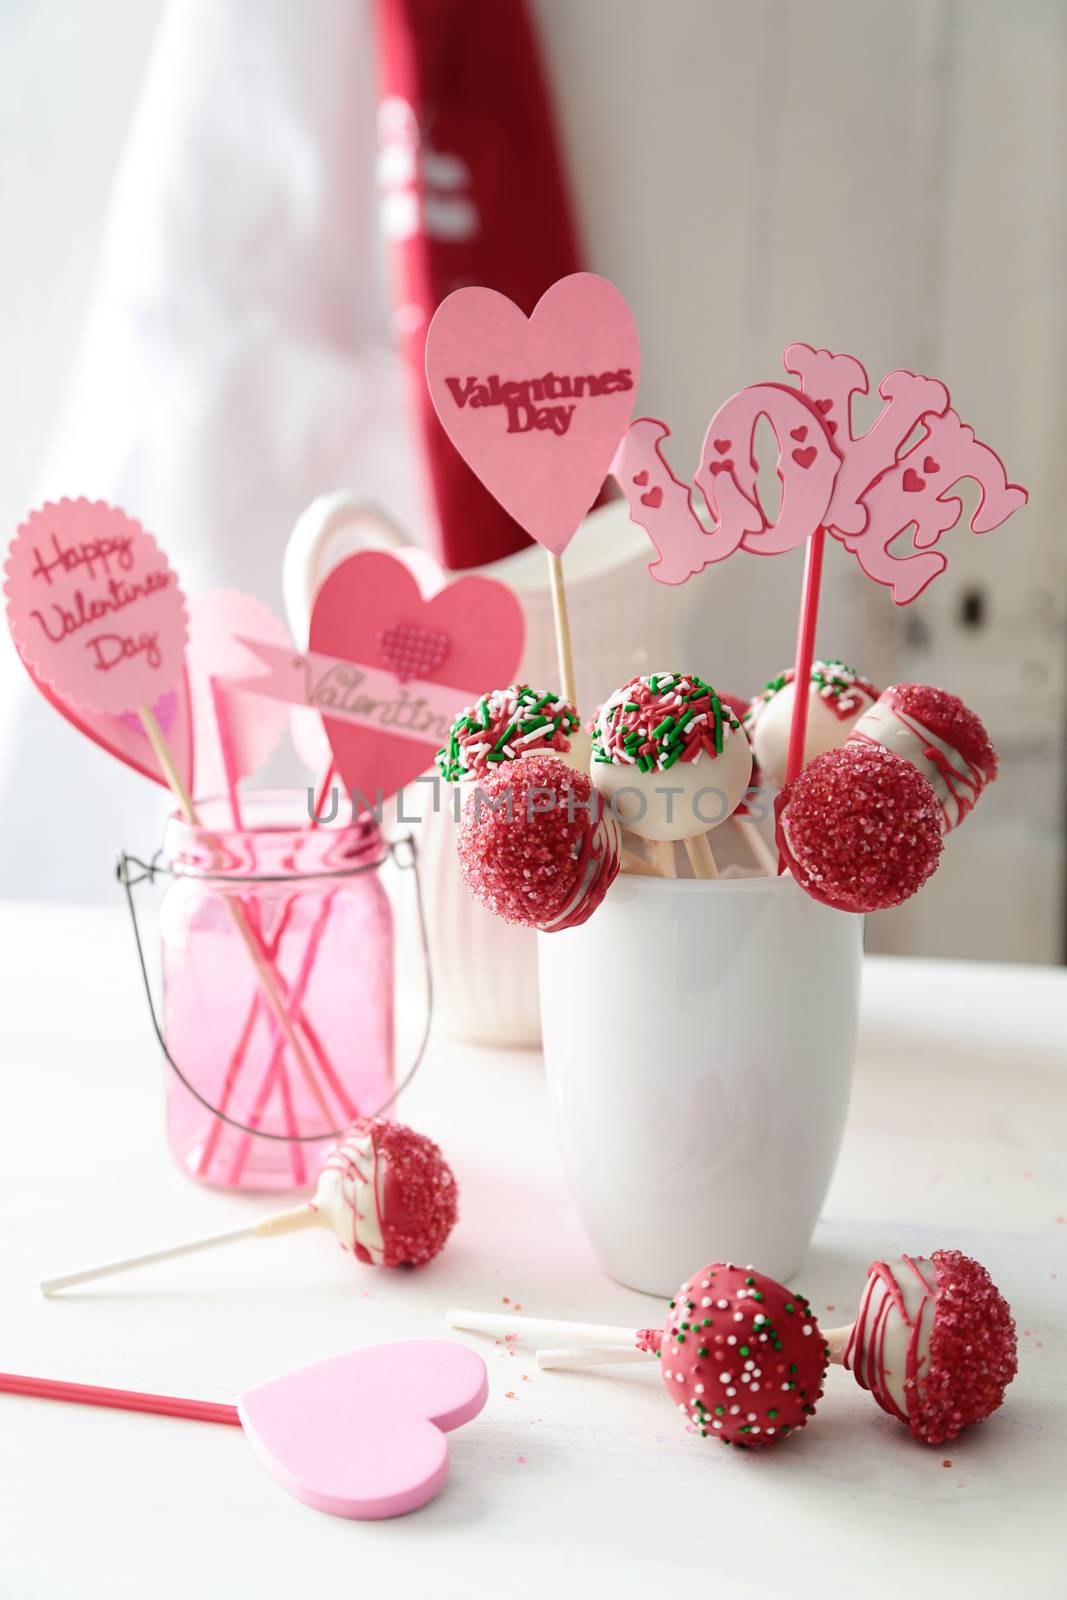 Closeup of cake pops with decorations for Valentine's Day